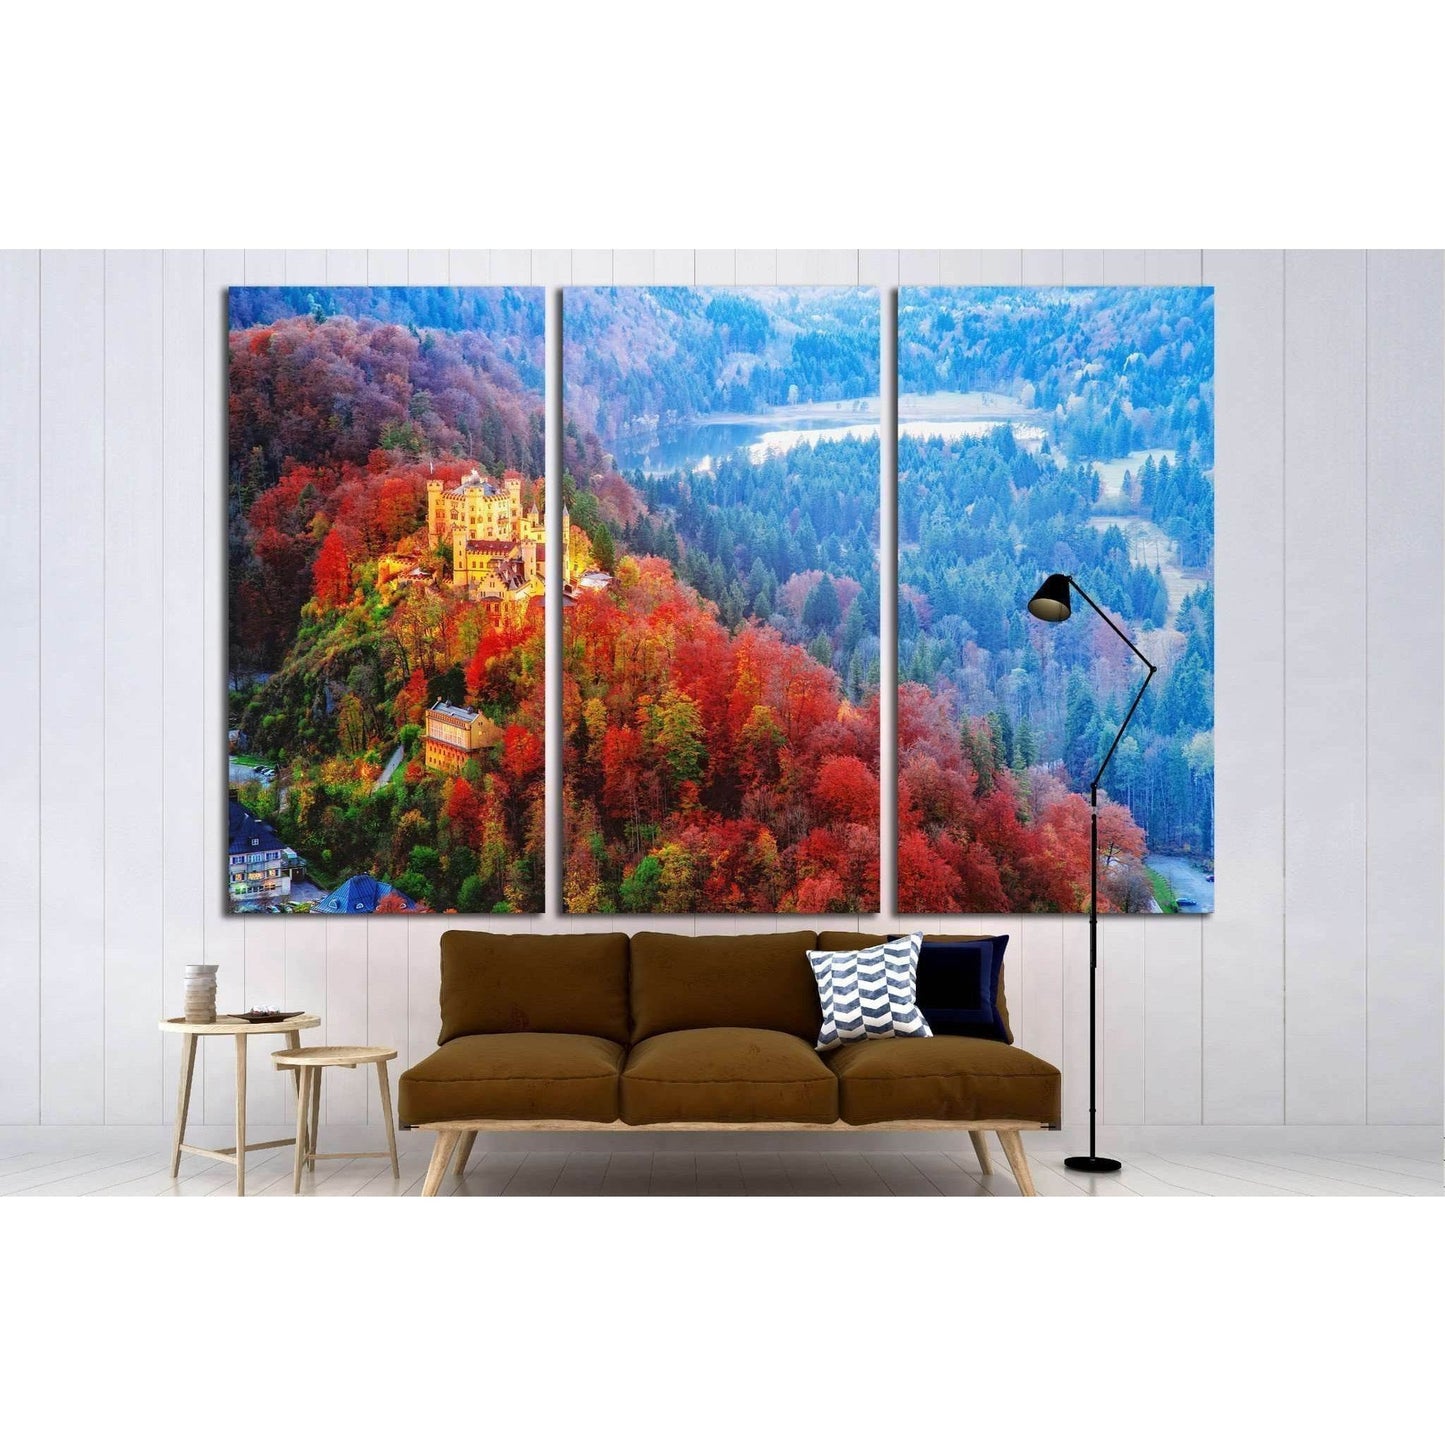 Hohenschwangau castle, Germany, Bavaria region №1811 Ready to Hang Canvas PrintThis canvas print showcases a vibrant autumnal landscape with a majestic castle nestled among richly hued trees. The warm reds and oranges of the foliage create a striking cont